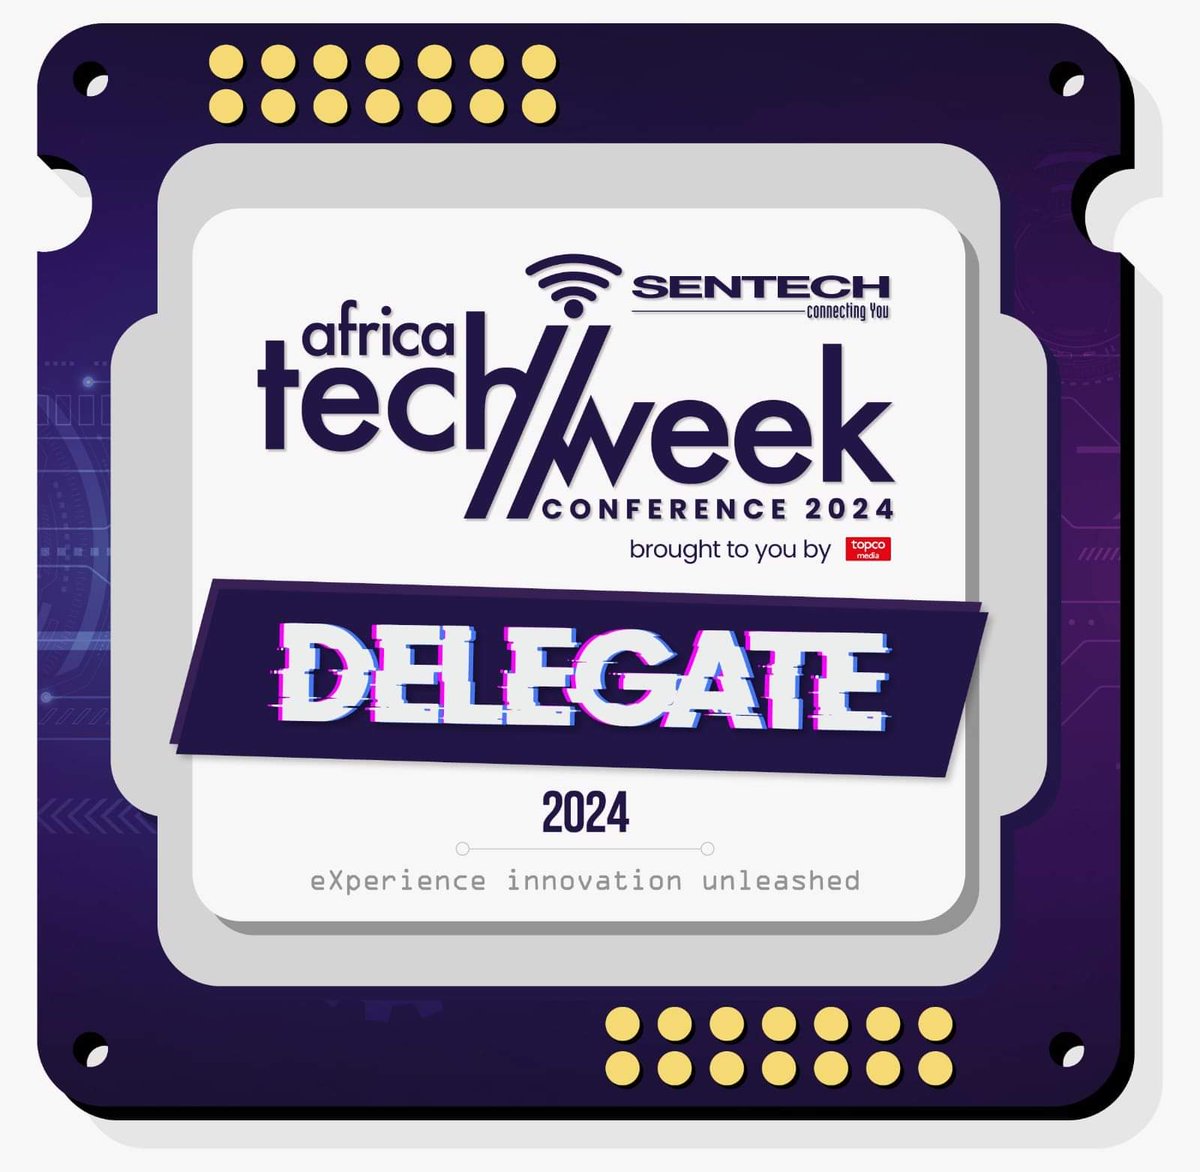 We are delighted to share that Business Tech Africa has forged an exciting partnership as official media partners for the esteemed Africa Tech Week Conference 2024. 

As media partners, we look forward to amplifying the voices of trailblazers, thought leaders, and visionaries.